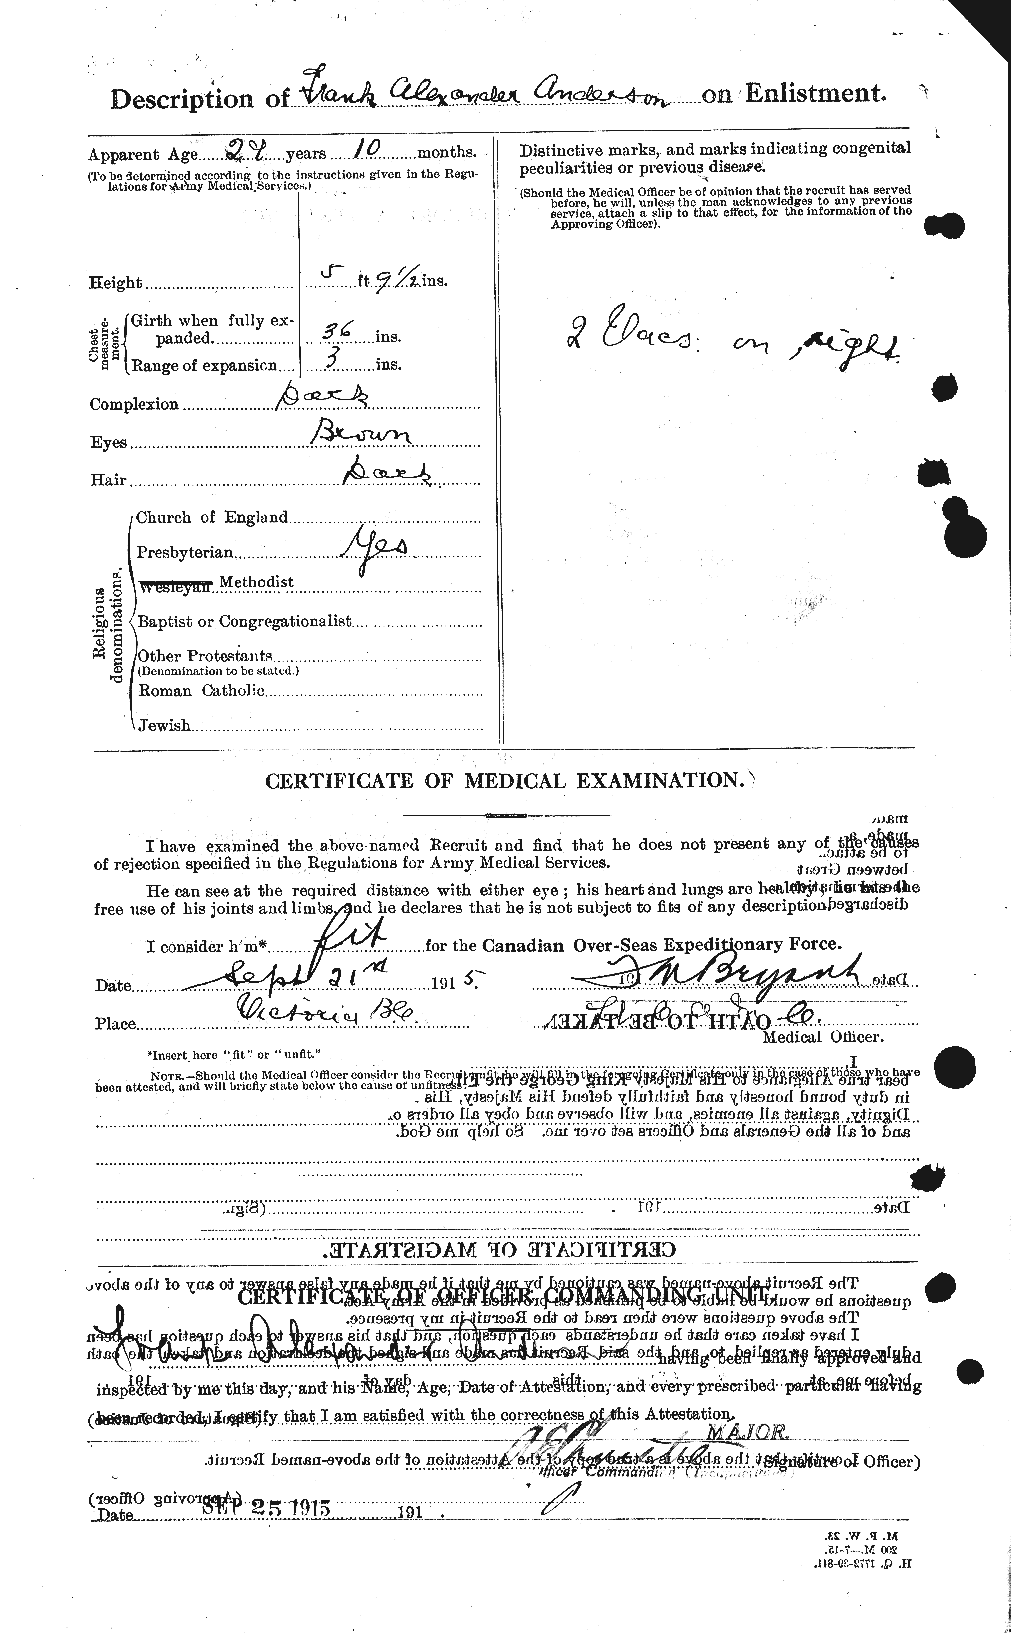 Personnel Records of the First World War - CEF 209850b